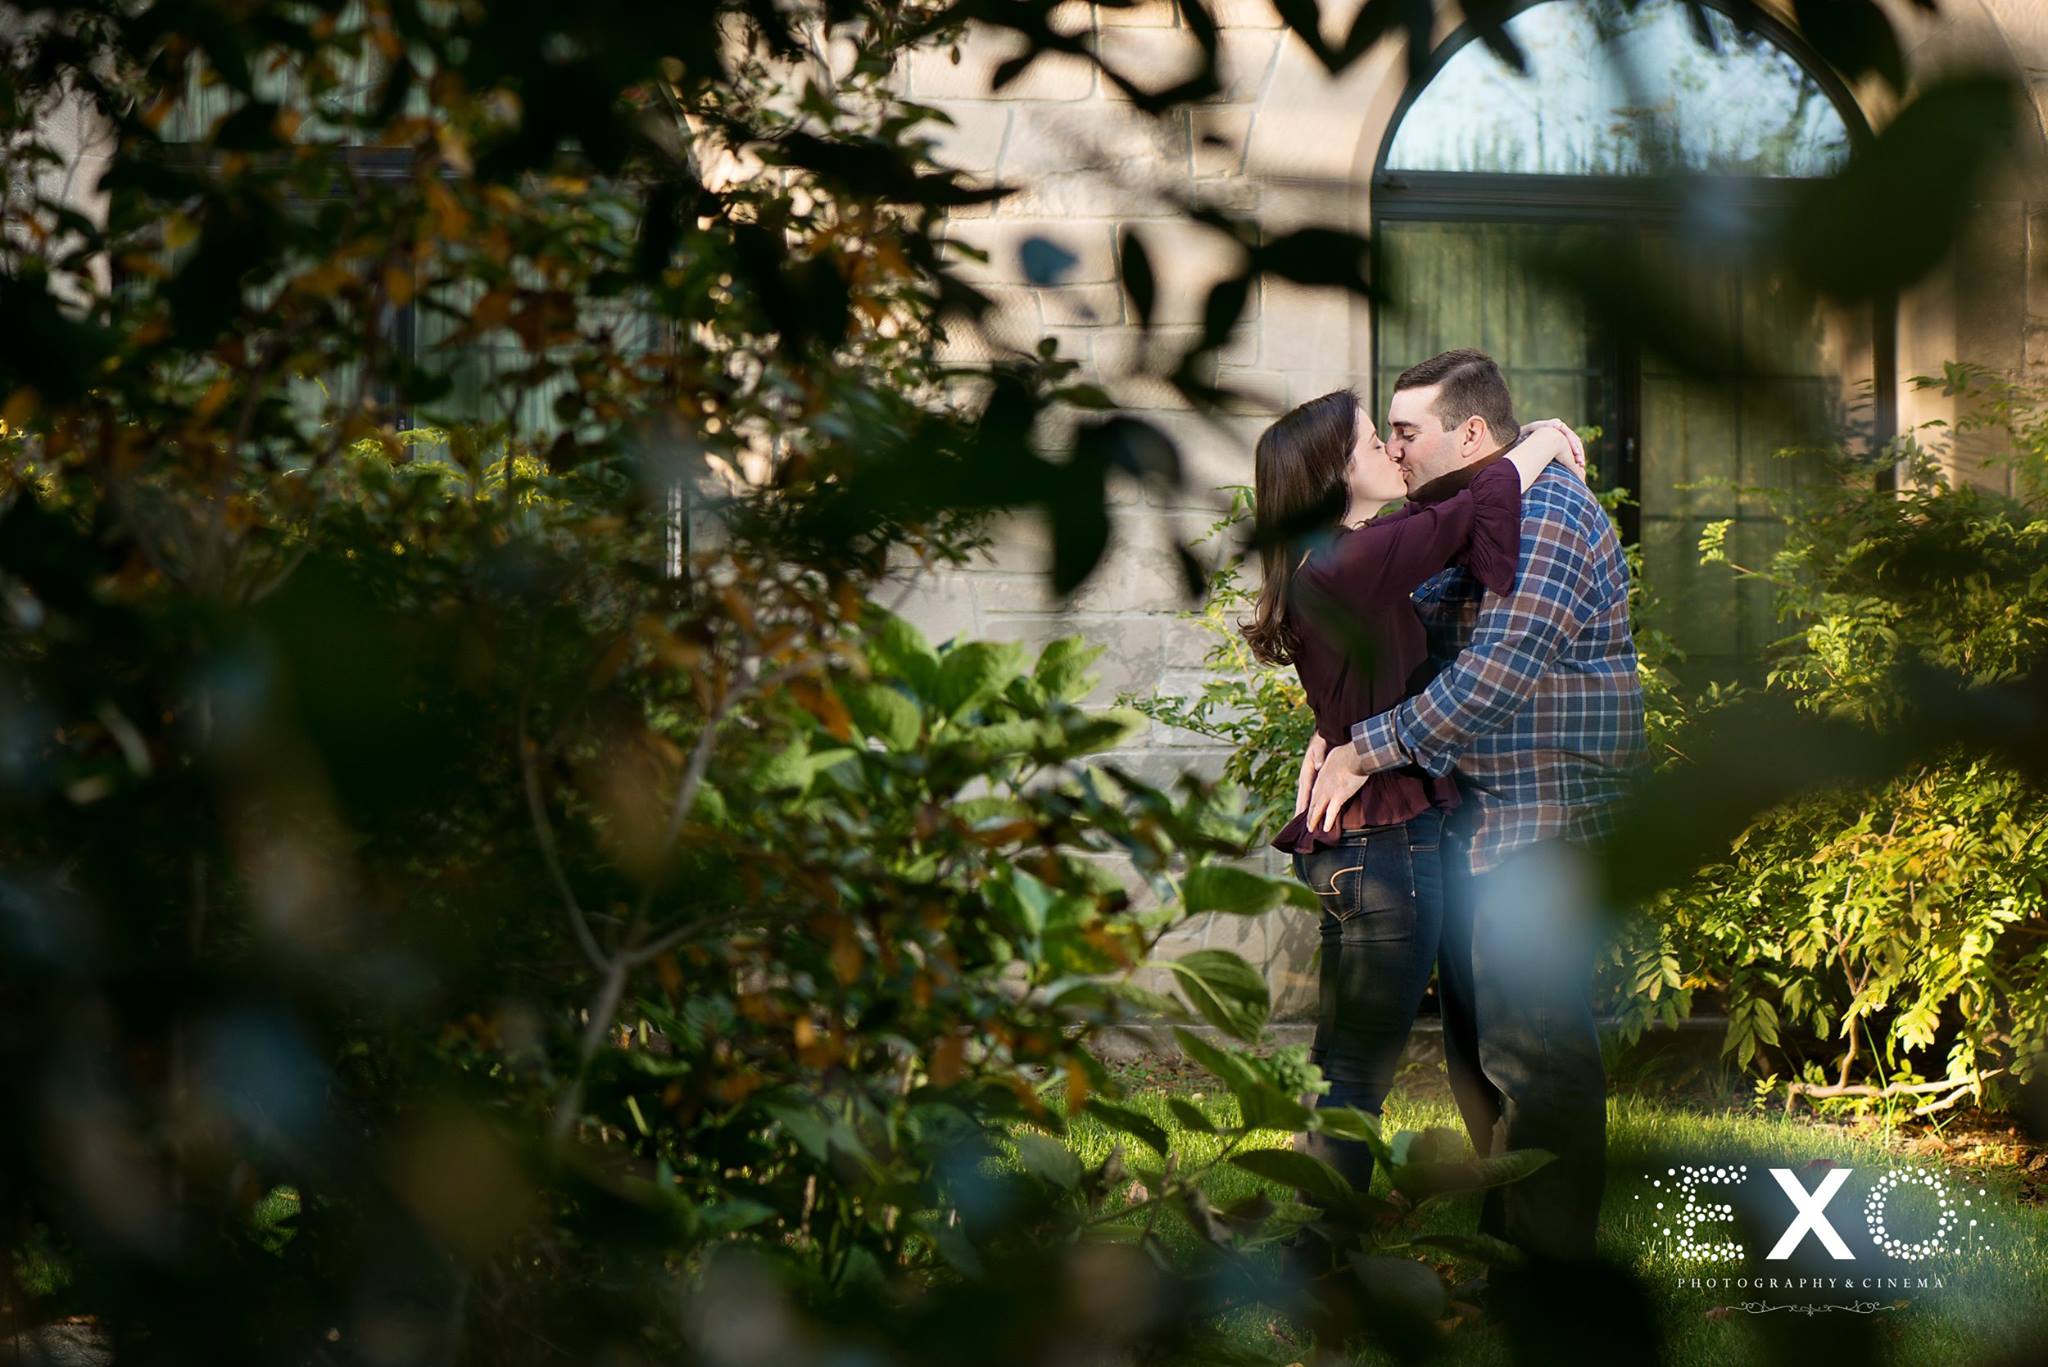 shot of jessica and jason from behind a tree at Planting Fields Arboretum